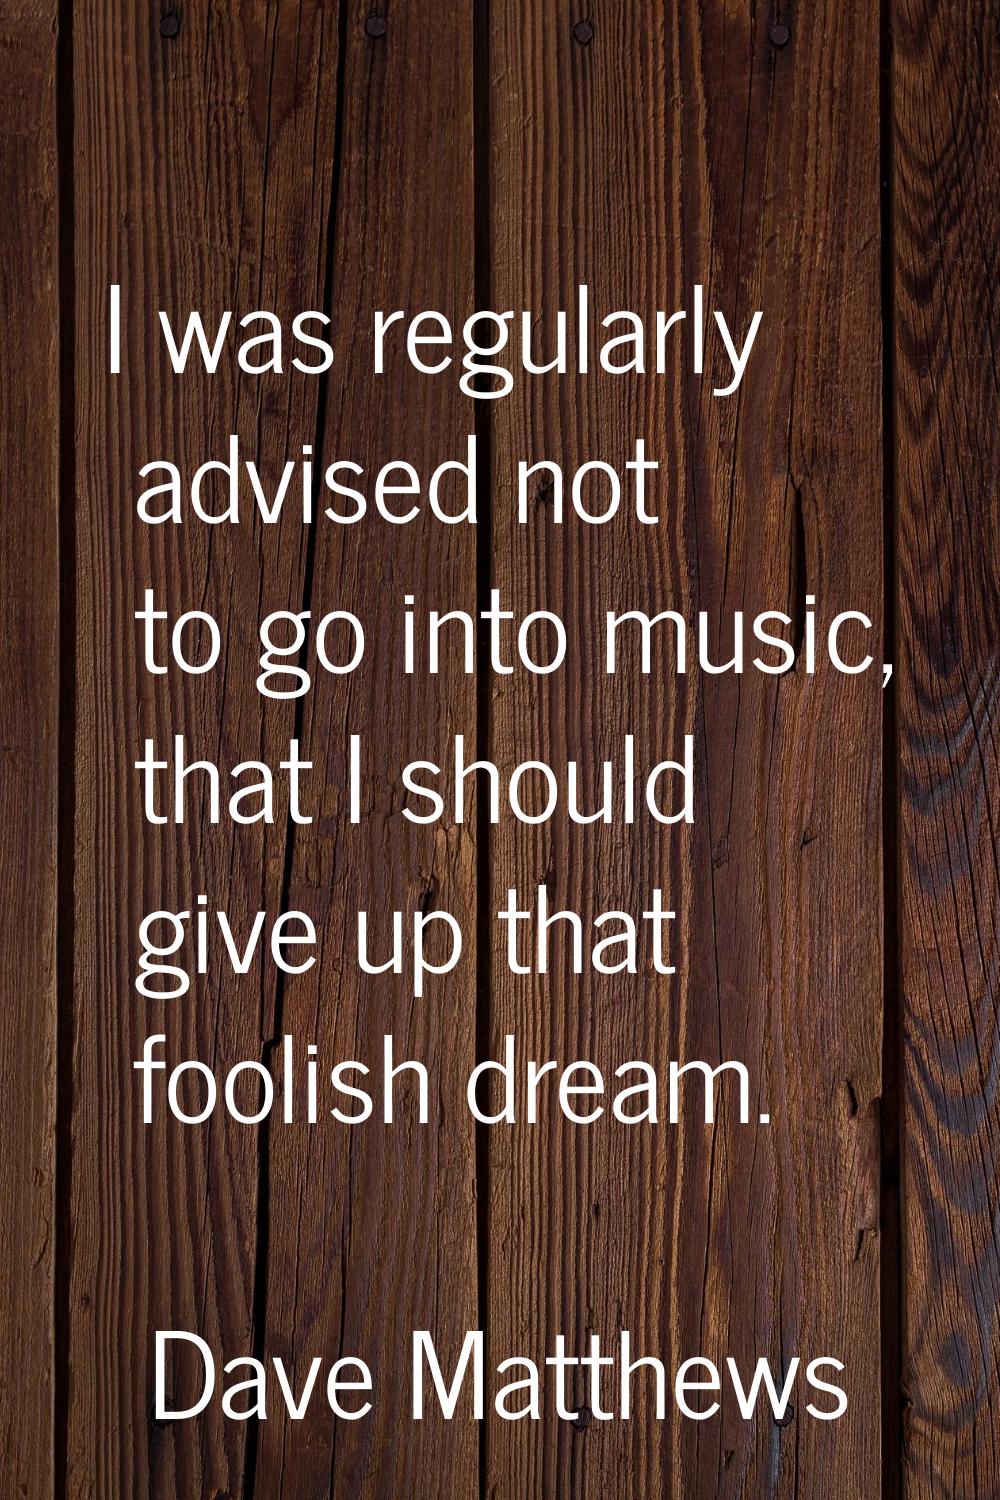 I was regularly advised not to go into music, that I should give up that foolish dream.